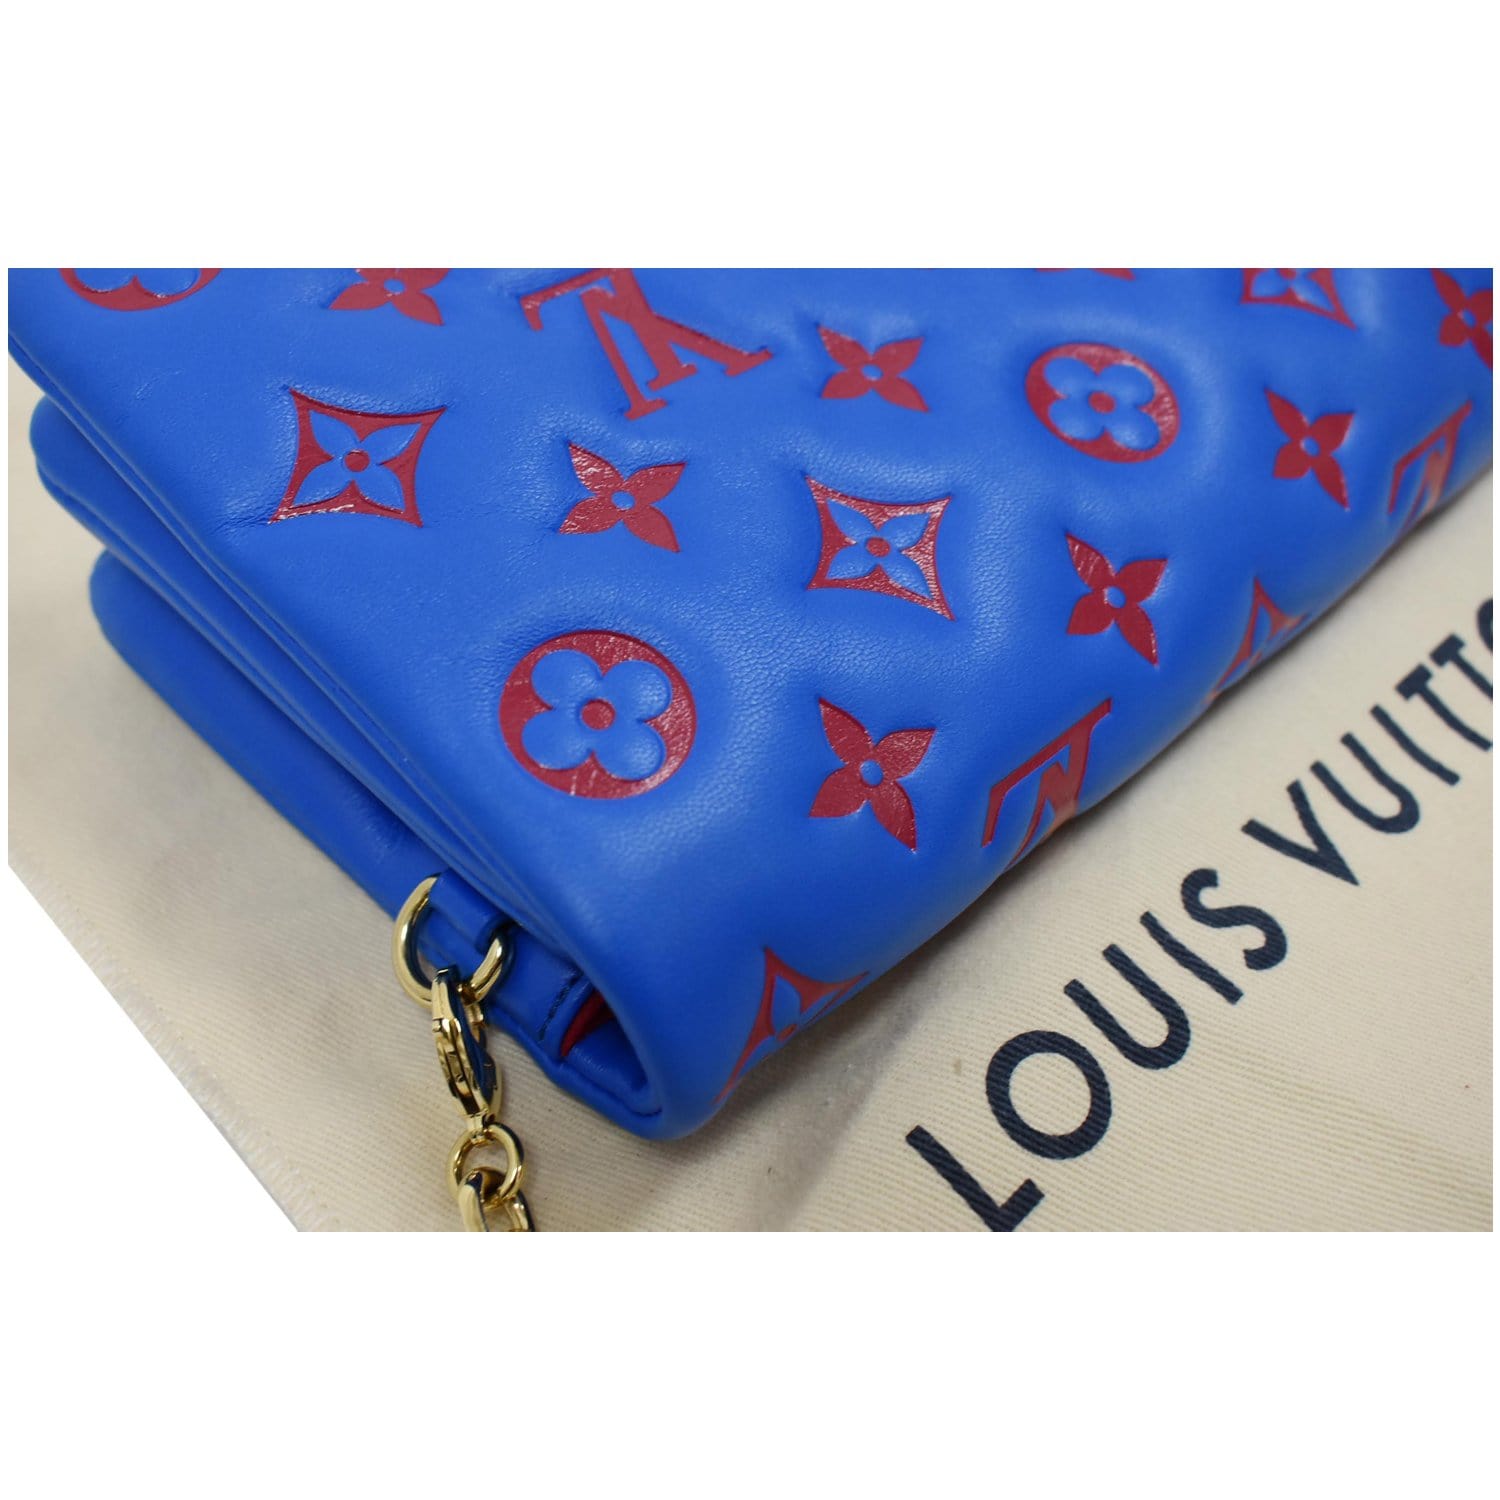 Pochette Coussin Monogram Embossed Puffy Leather